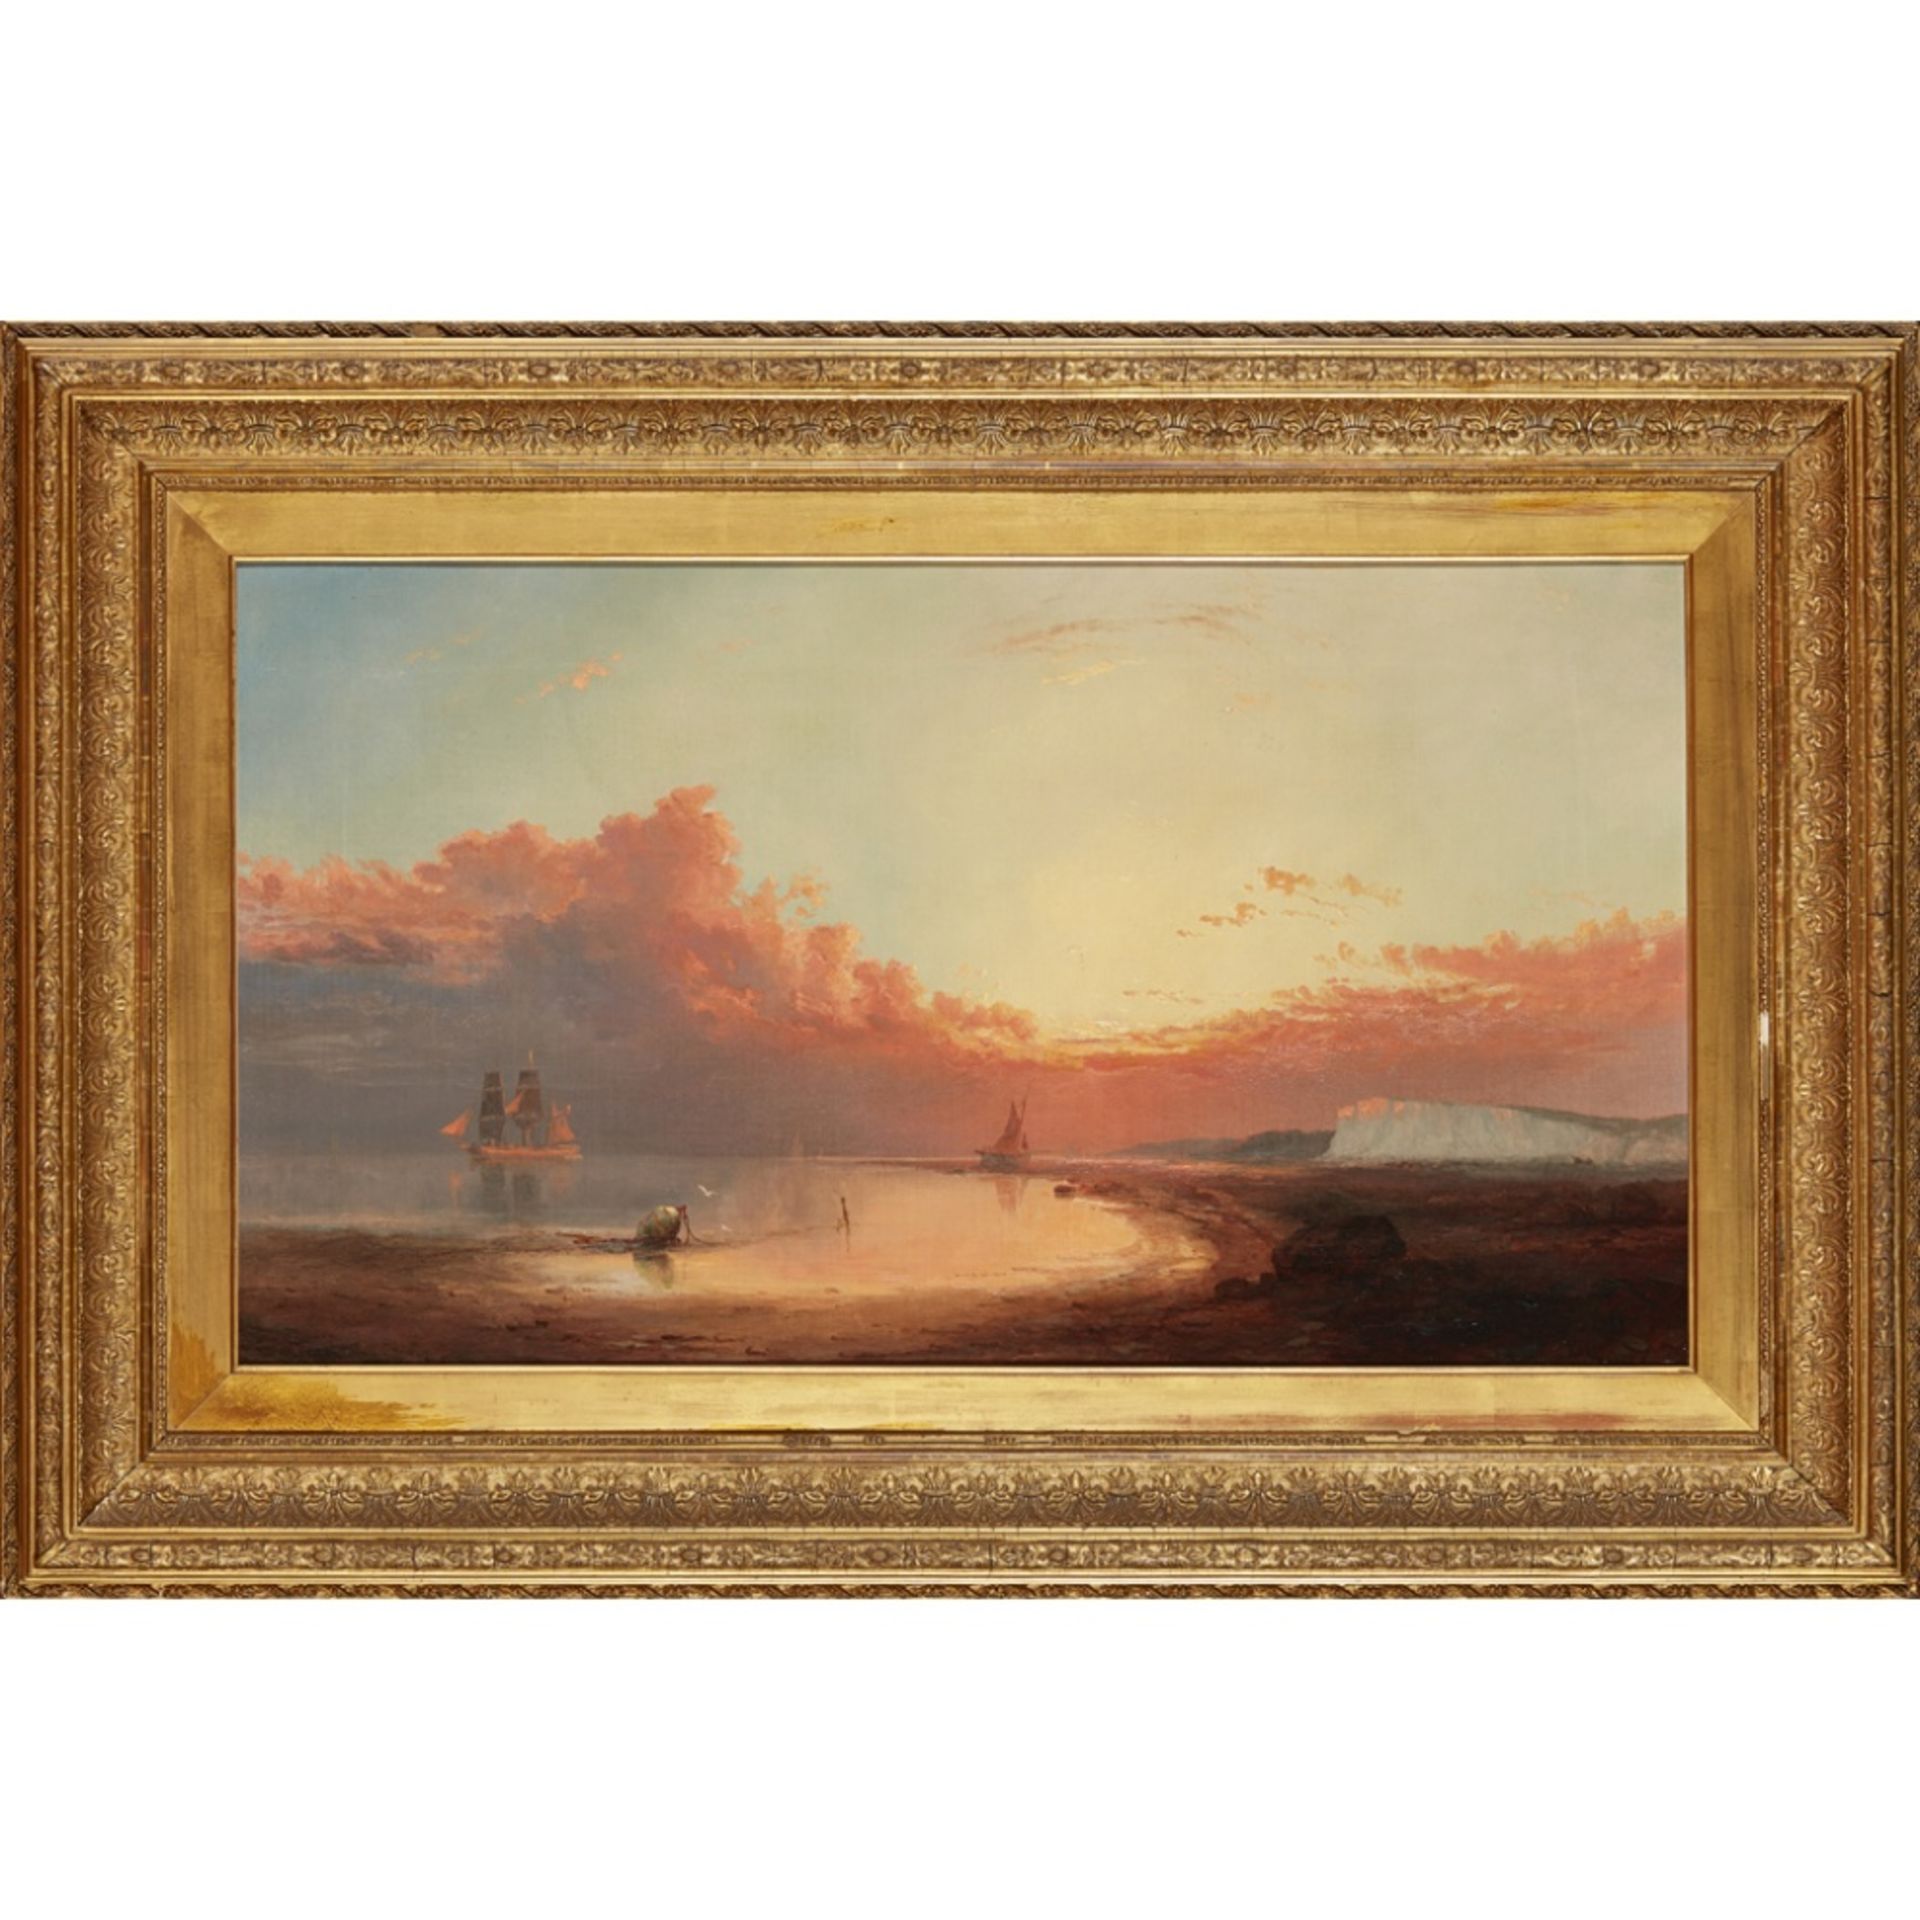 GEORGE GREGORY (BRITISH 1849-1938)SHIPPING OFF THE ENGLISH COAST, SUNSET Signed and dated 1877, - Image 2 of 2